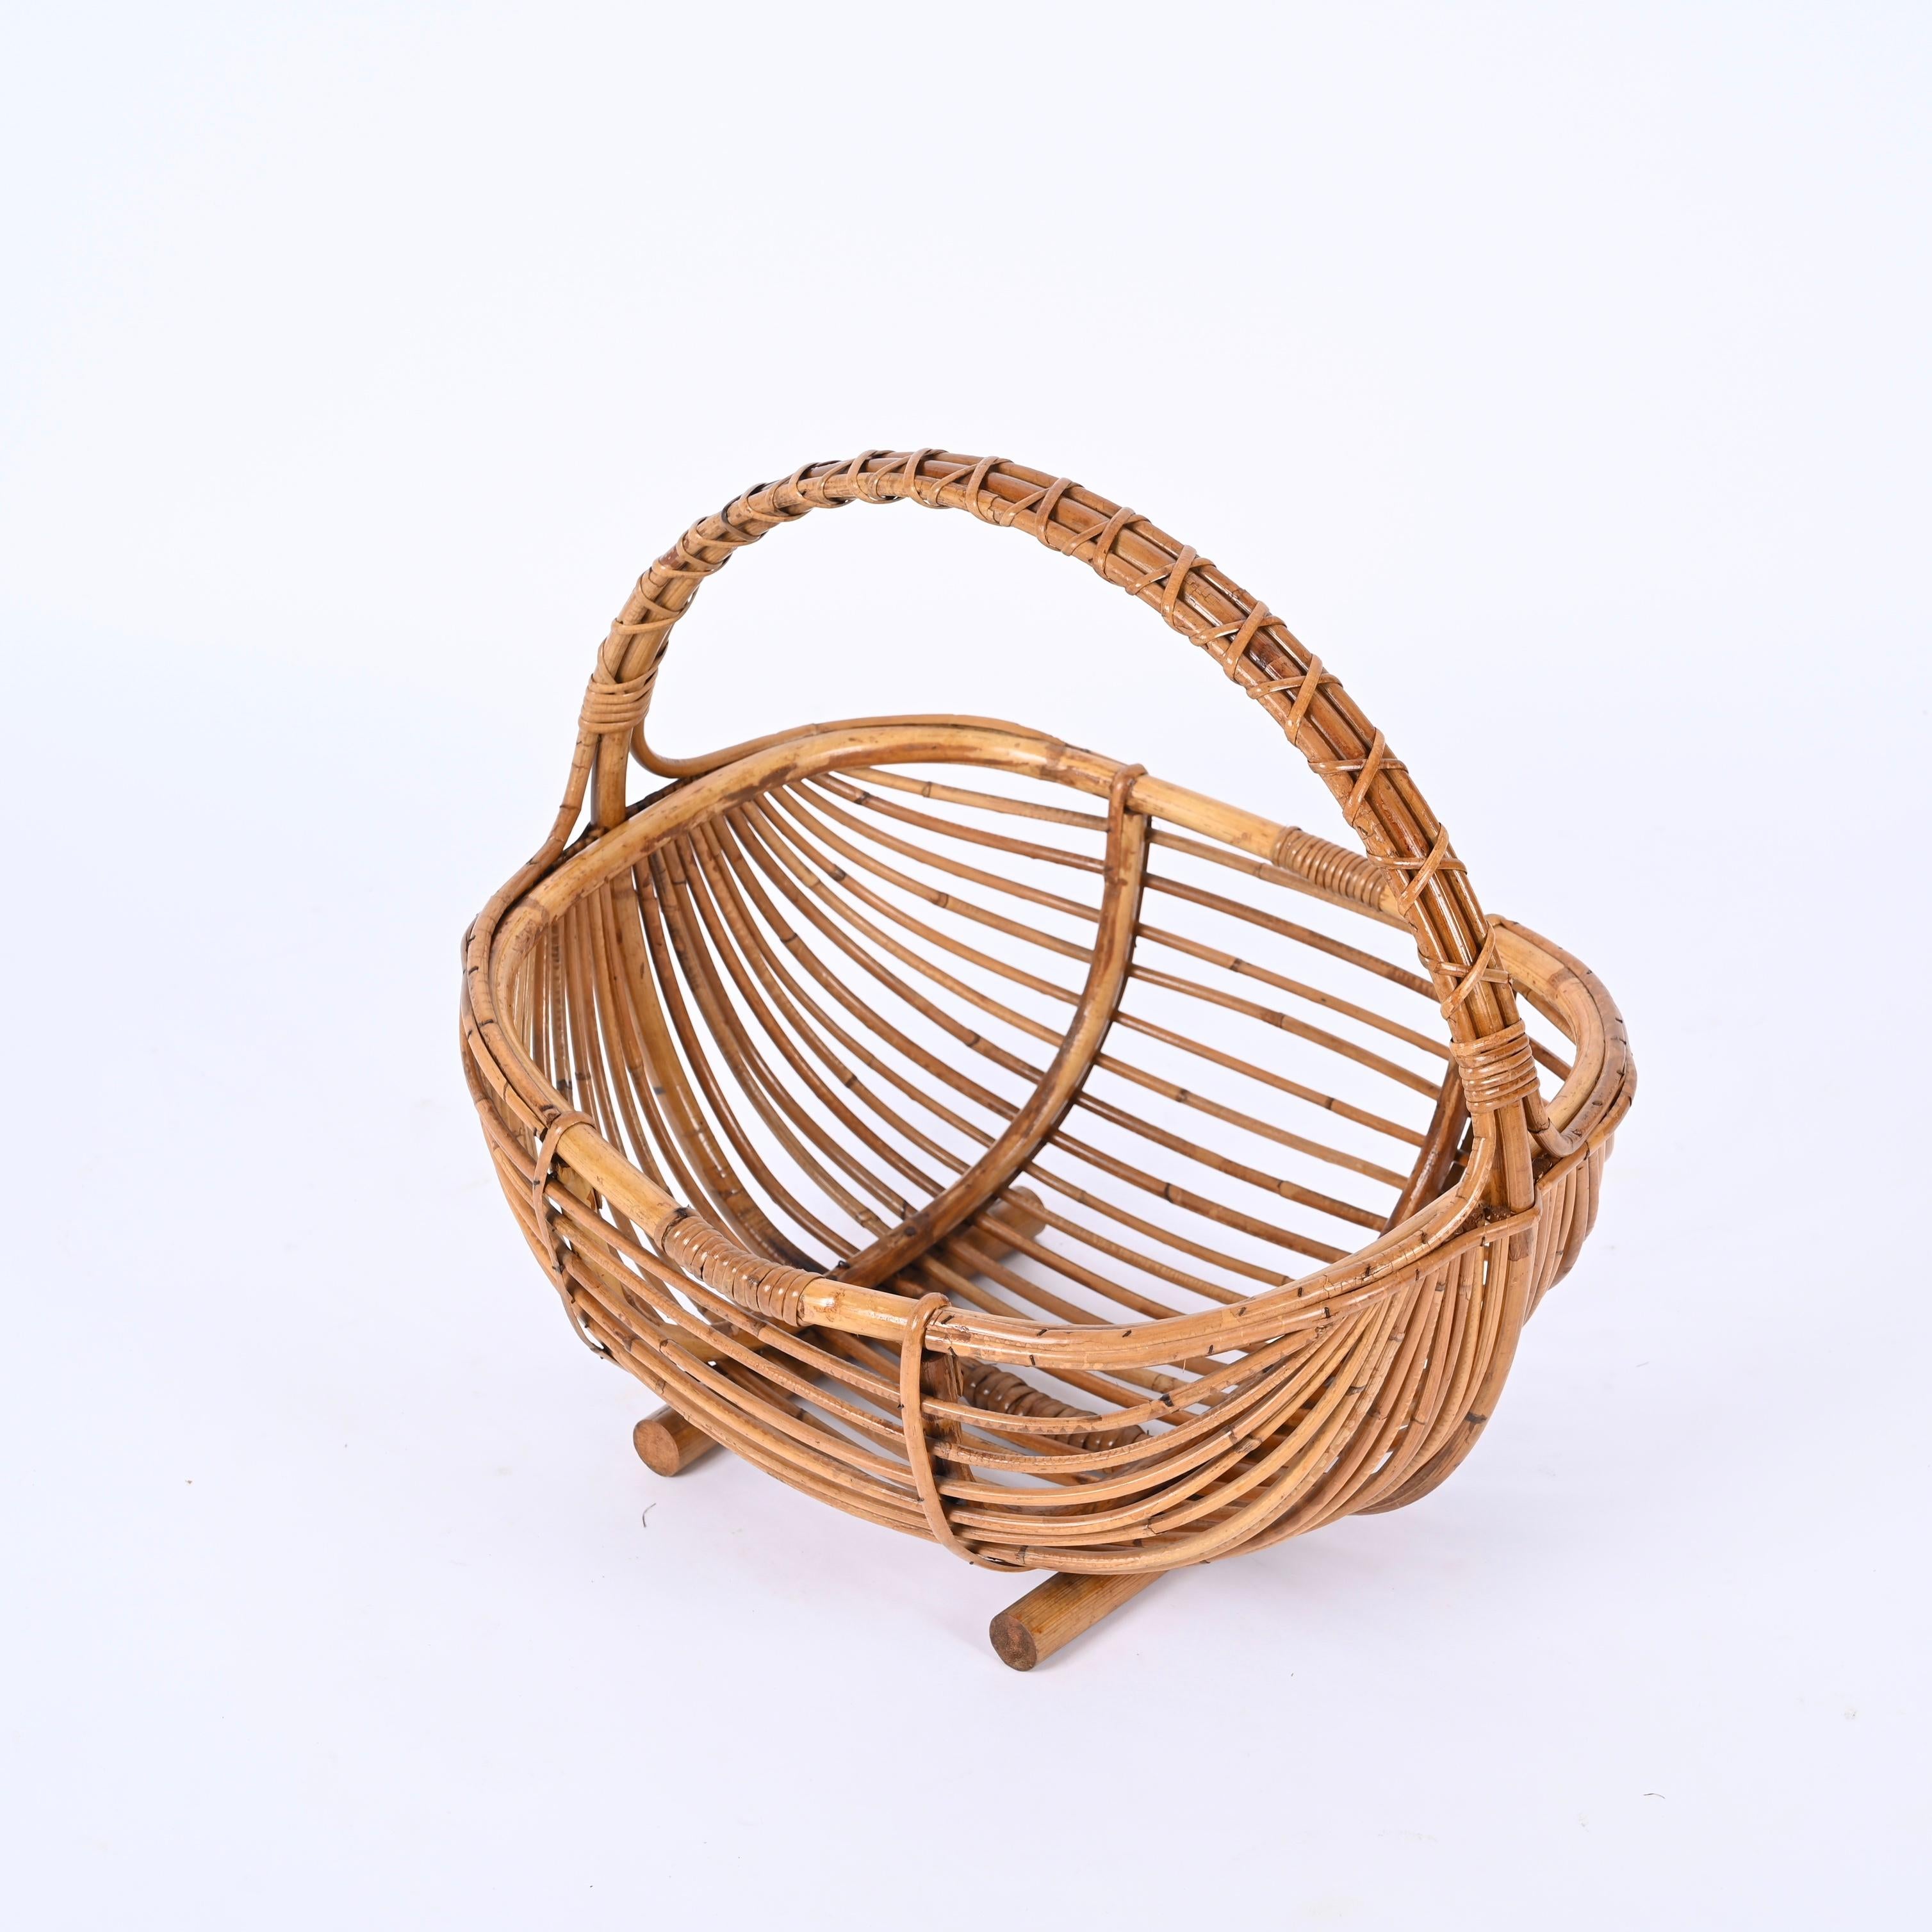 Midcentury French Riviera Magazine Rack in Bamboo and Rattan, Italy 1970s For Sale 8